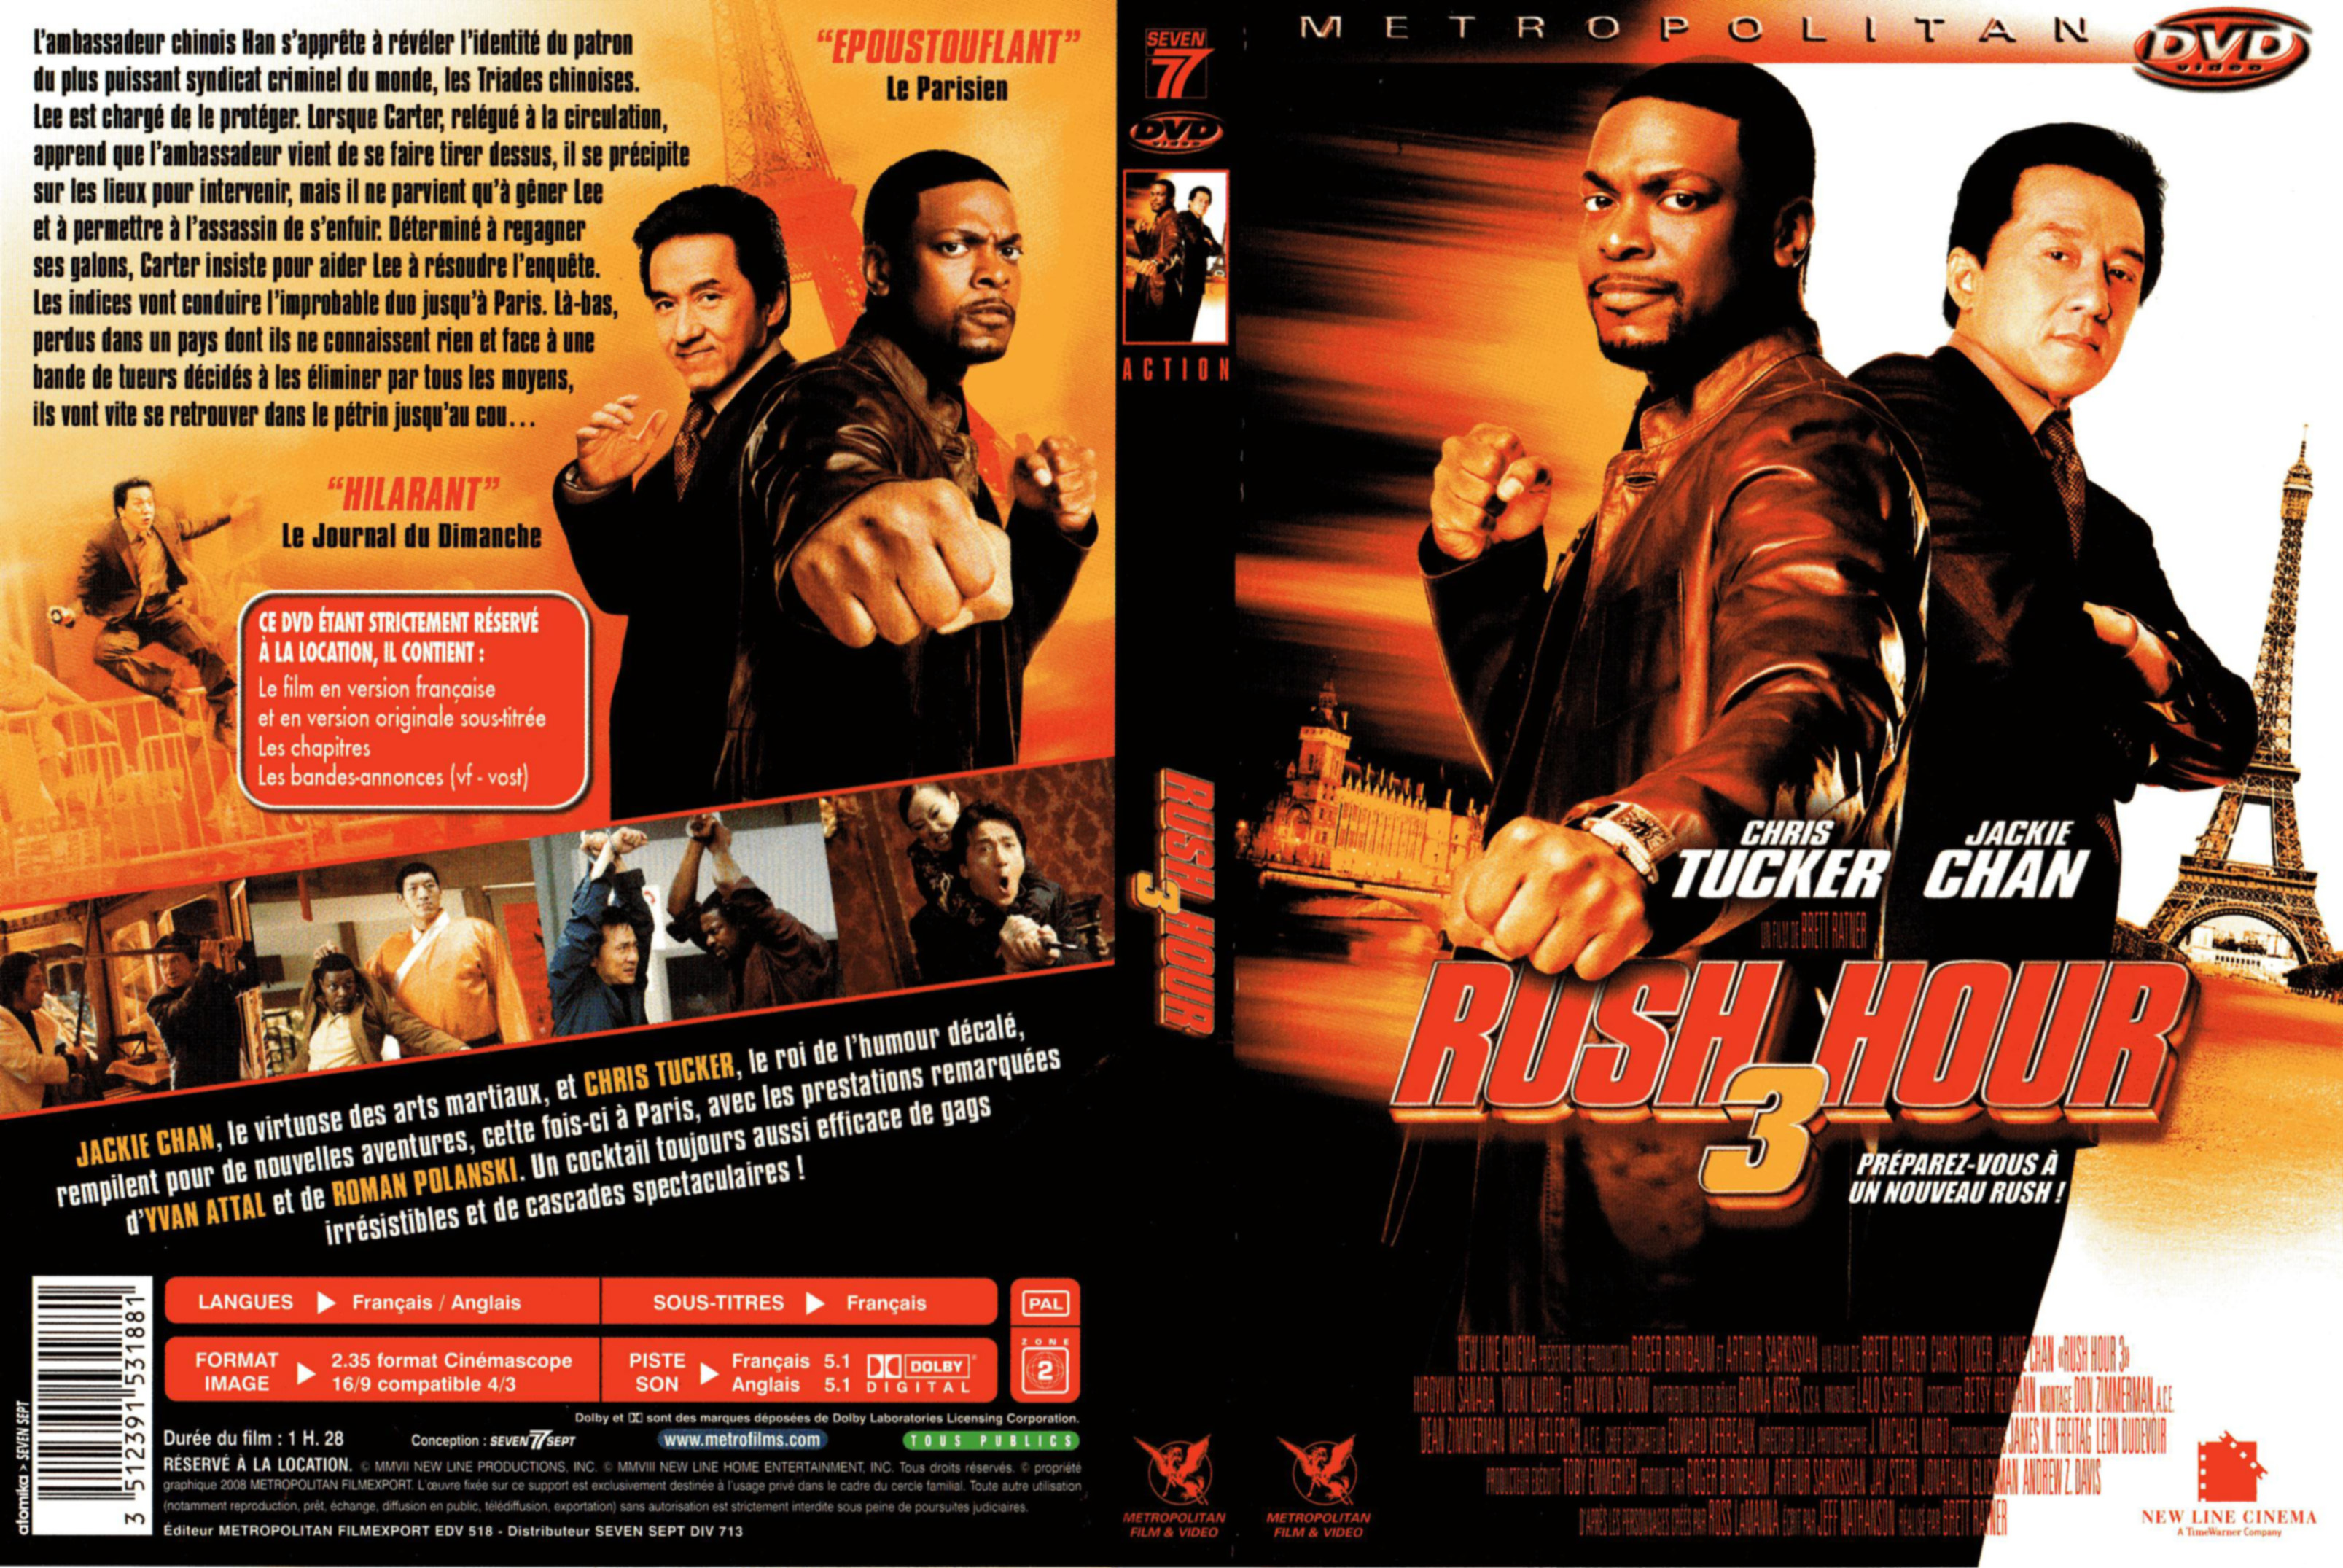 Jaquette DVD Rush hour 3